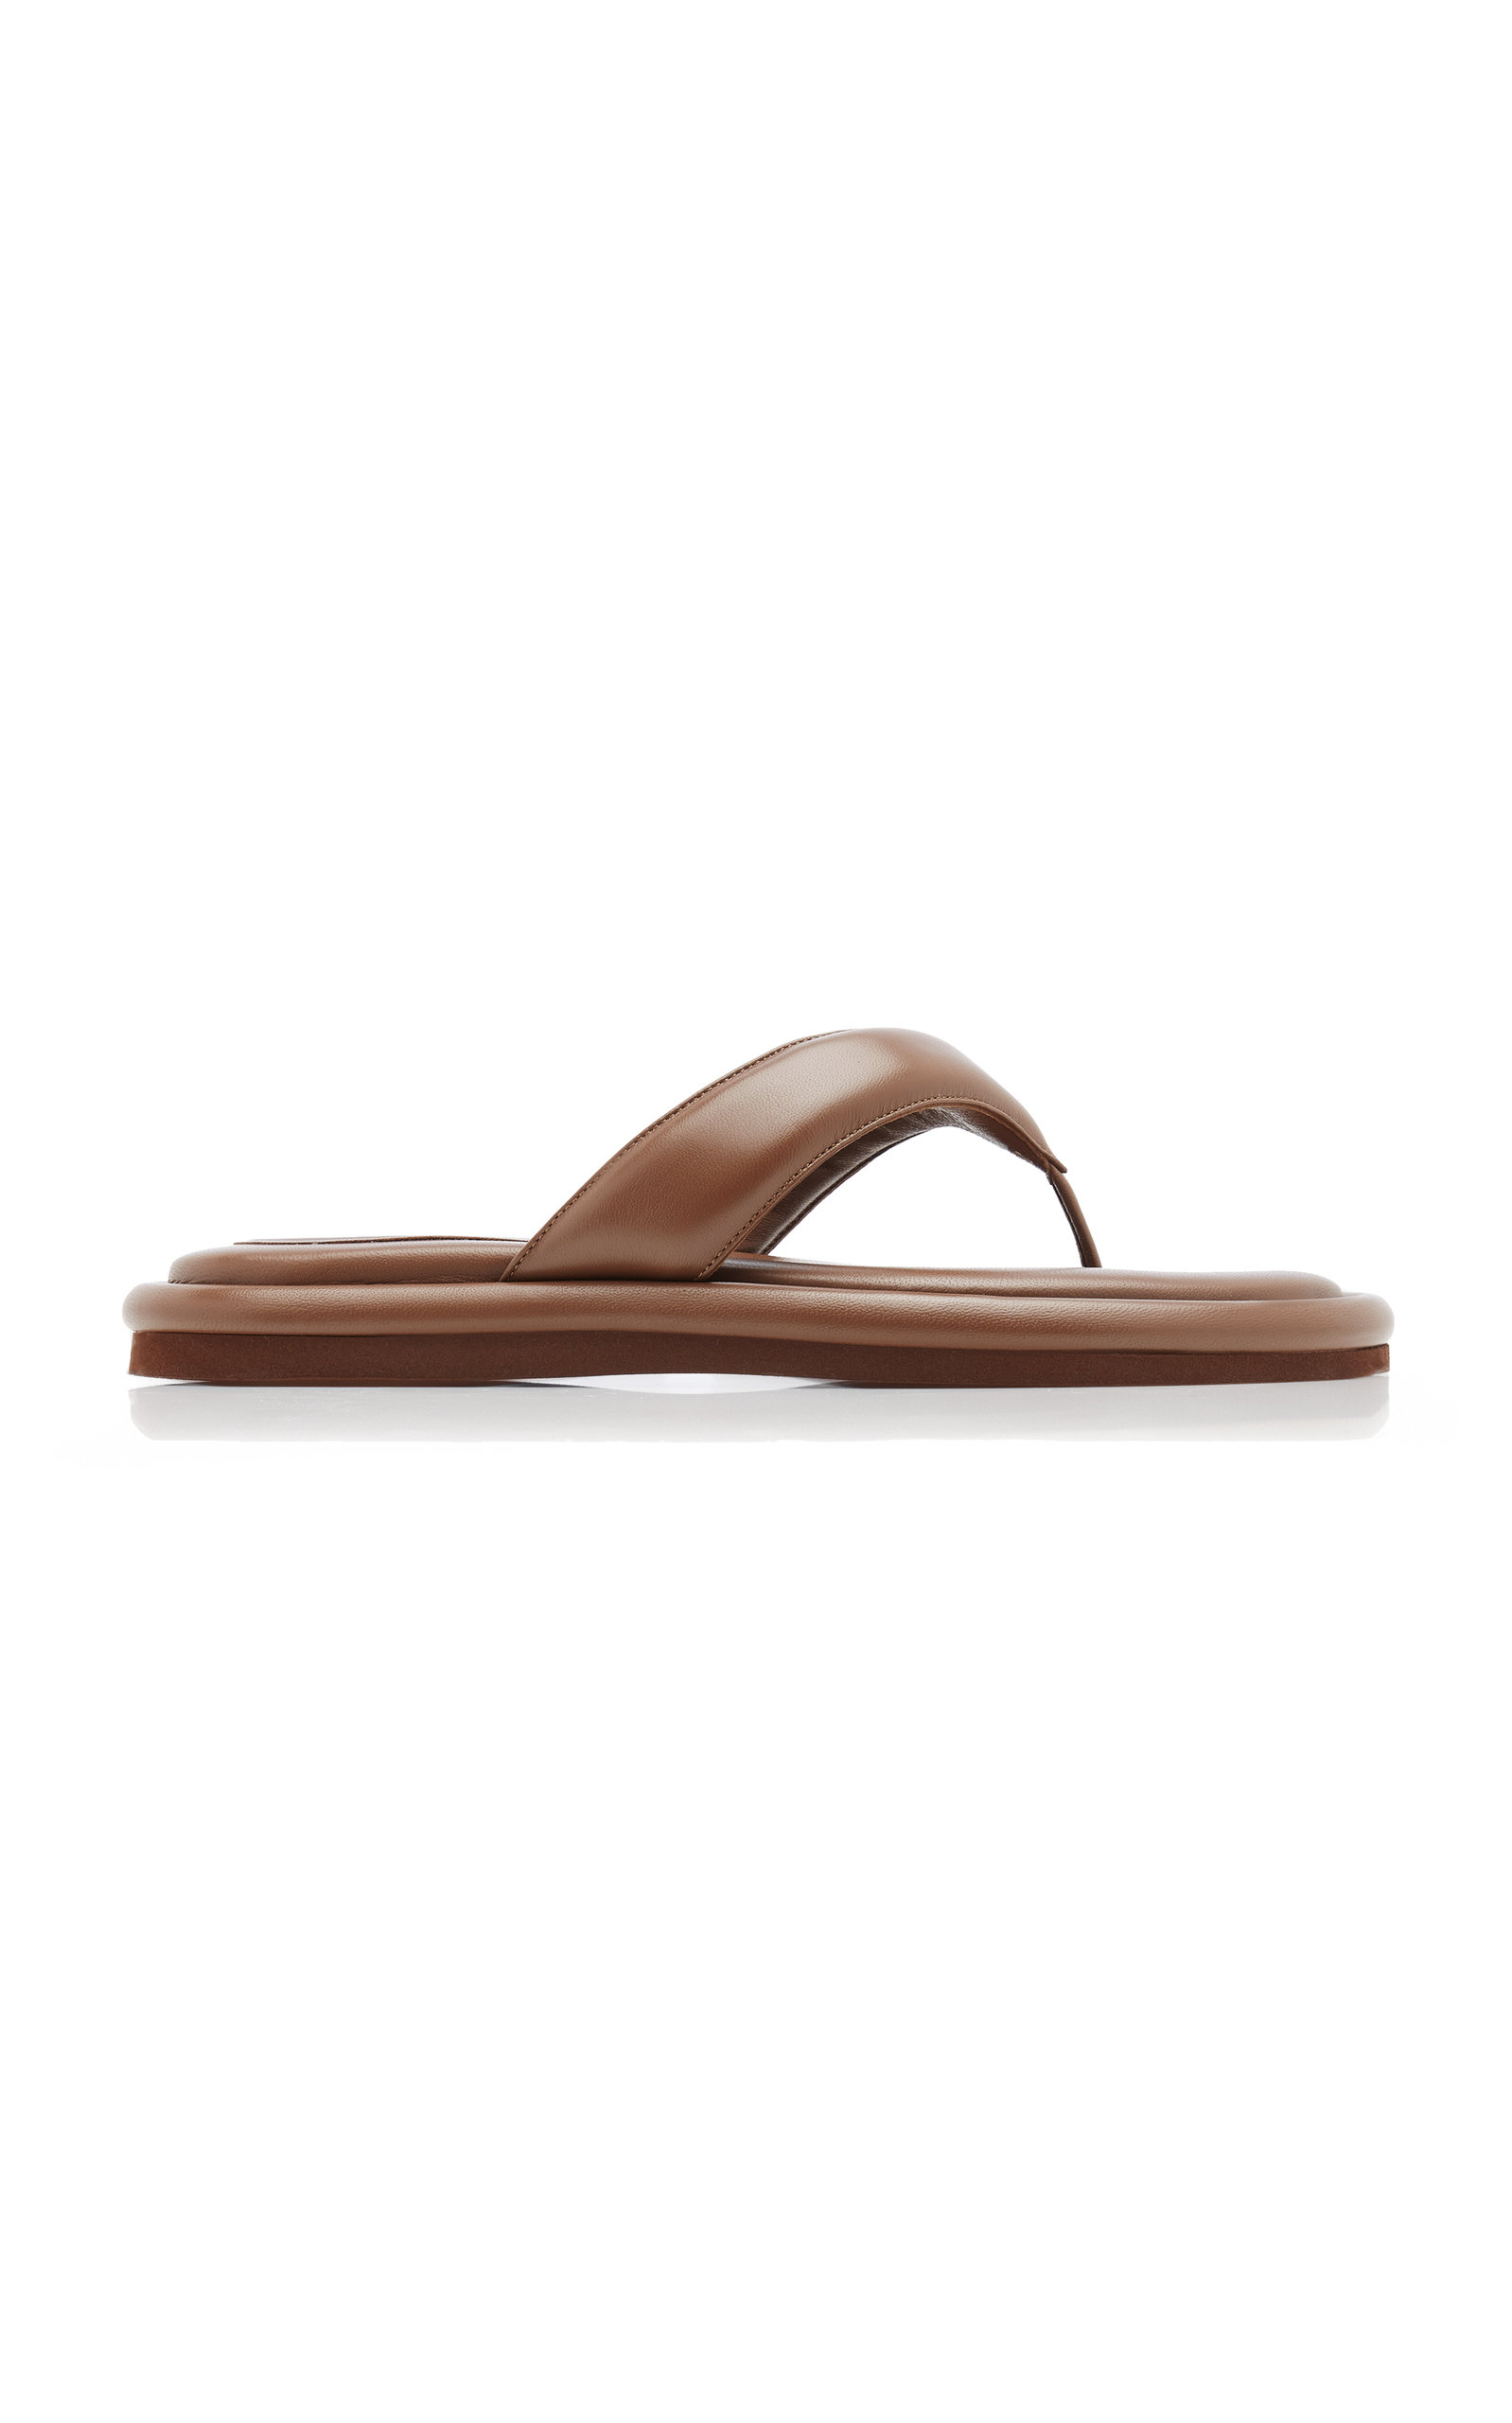 Gia Borghini Women's Padded Leather Thong Sandals